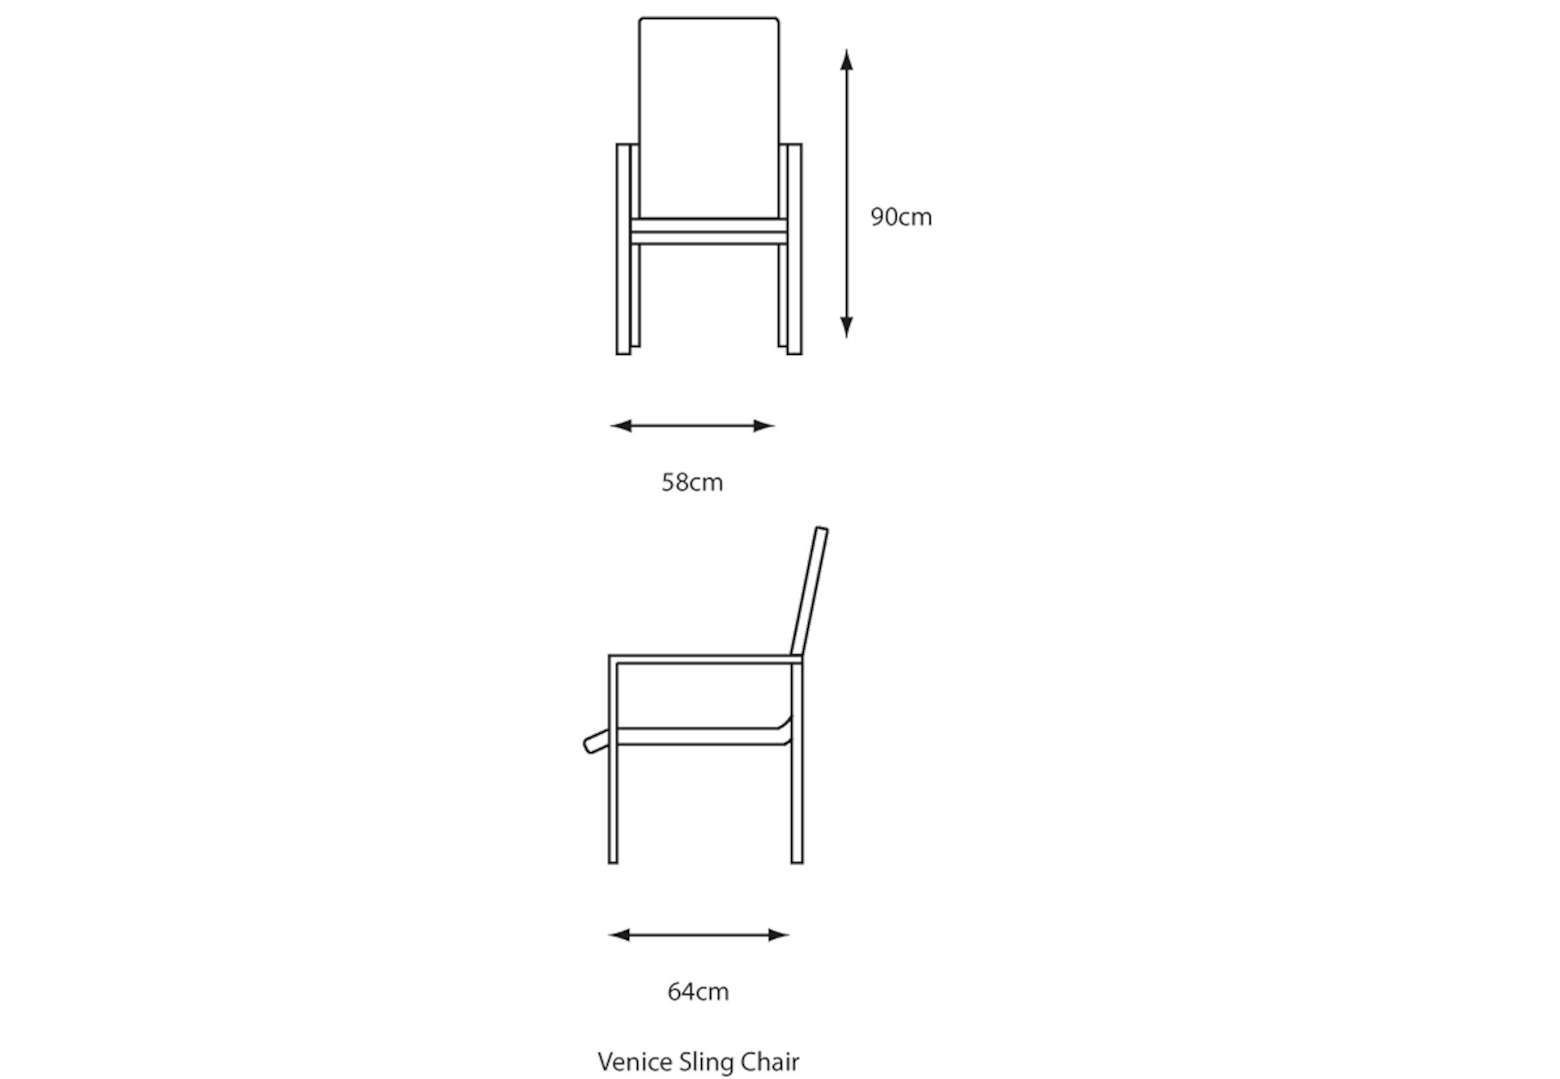 Stacking Chair - dimensions image